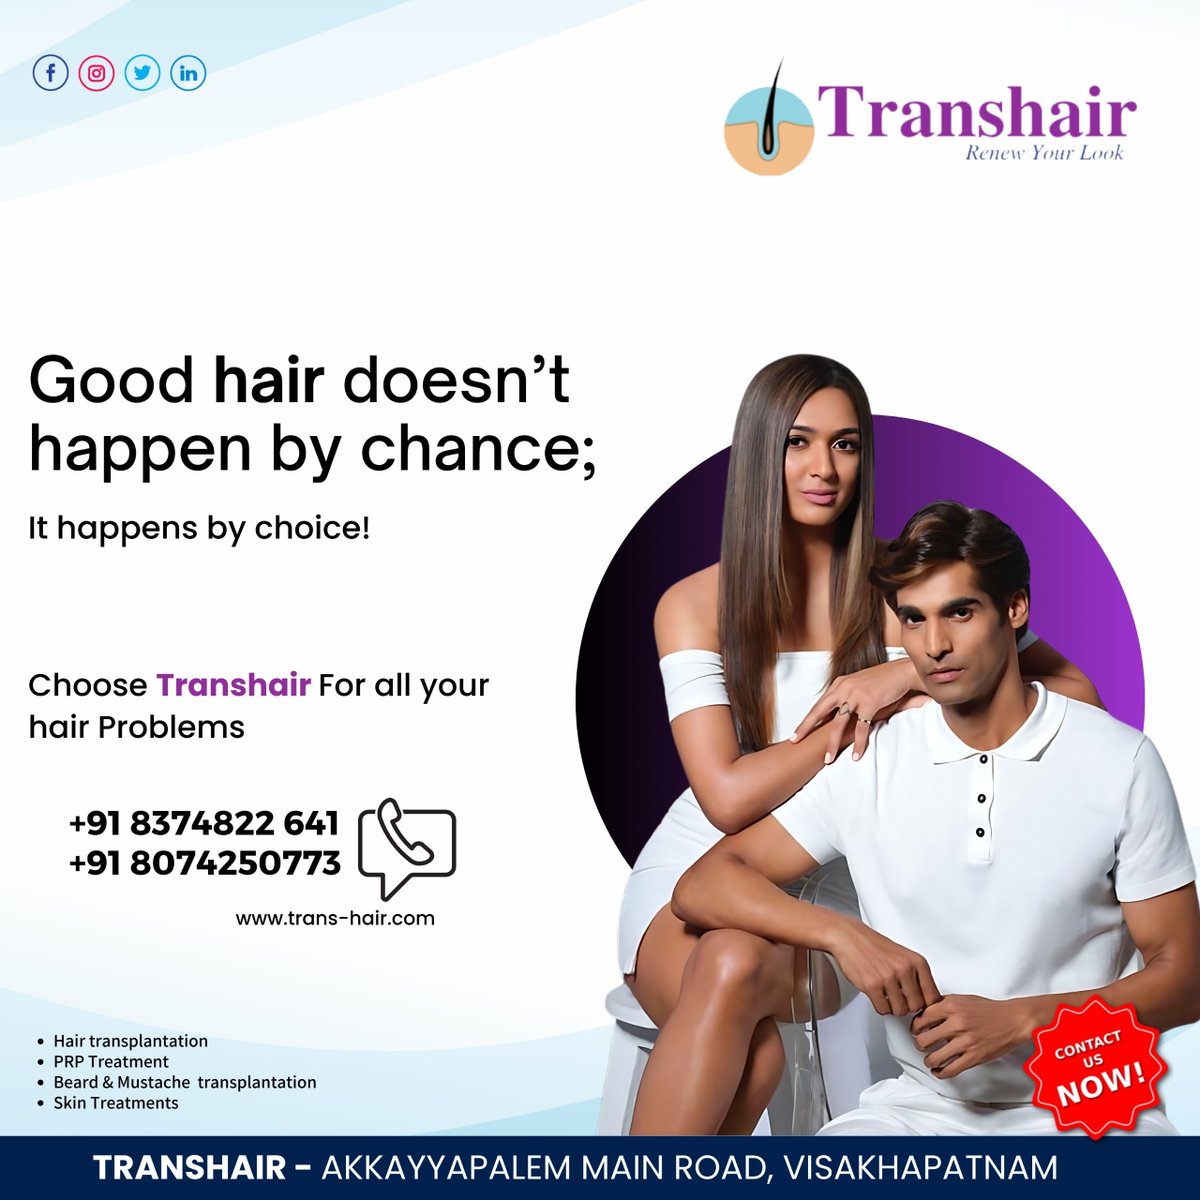 Renew Your Look with Transhair! 

Don't leave your hair to chance; choose excellence with Transhair! 💇‍♂️💇‍♀️

Say goodbye to hair problems with our expert services:

Contact us now:
📞 +91 8374822 641
📞 +91 8074250773

#Transhair #HairTransformation #HairCare #HairTransplantation